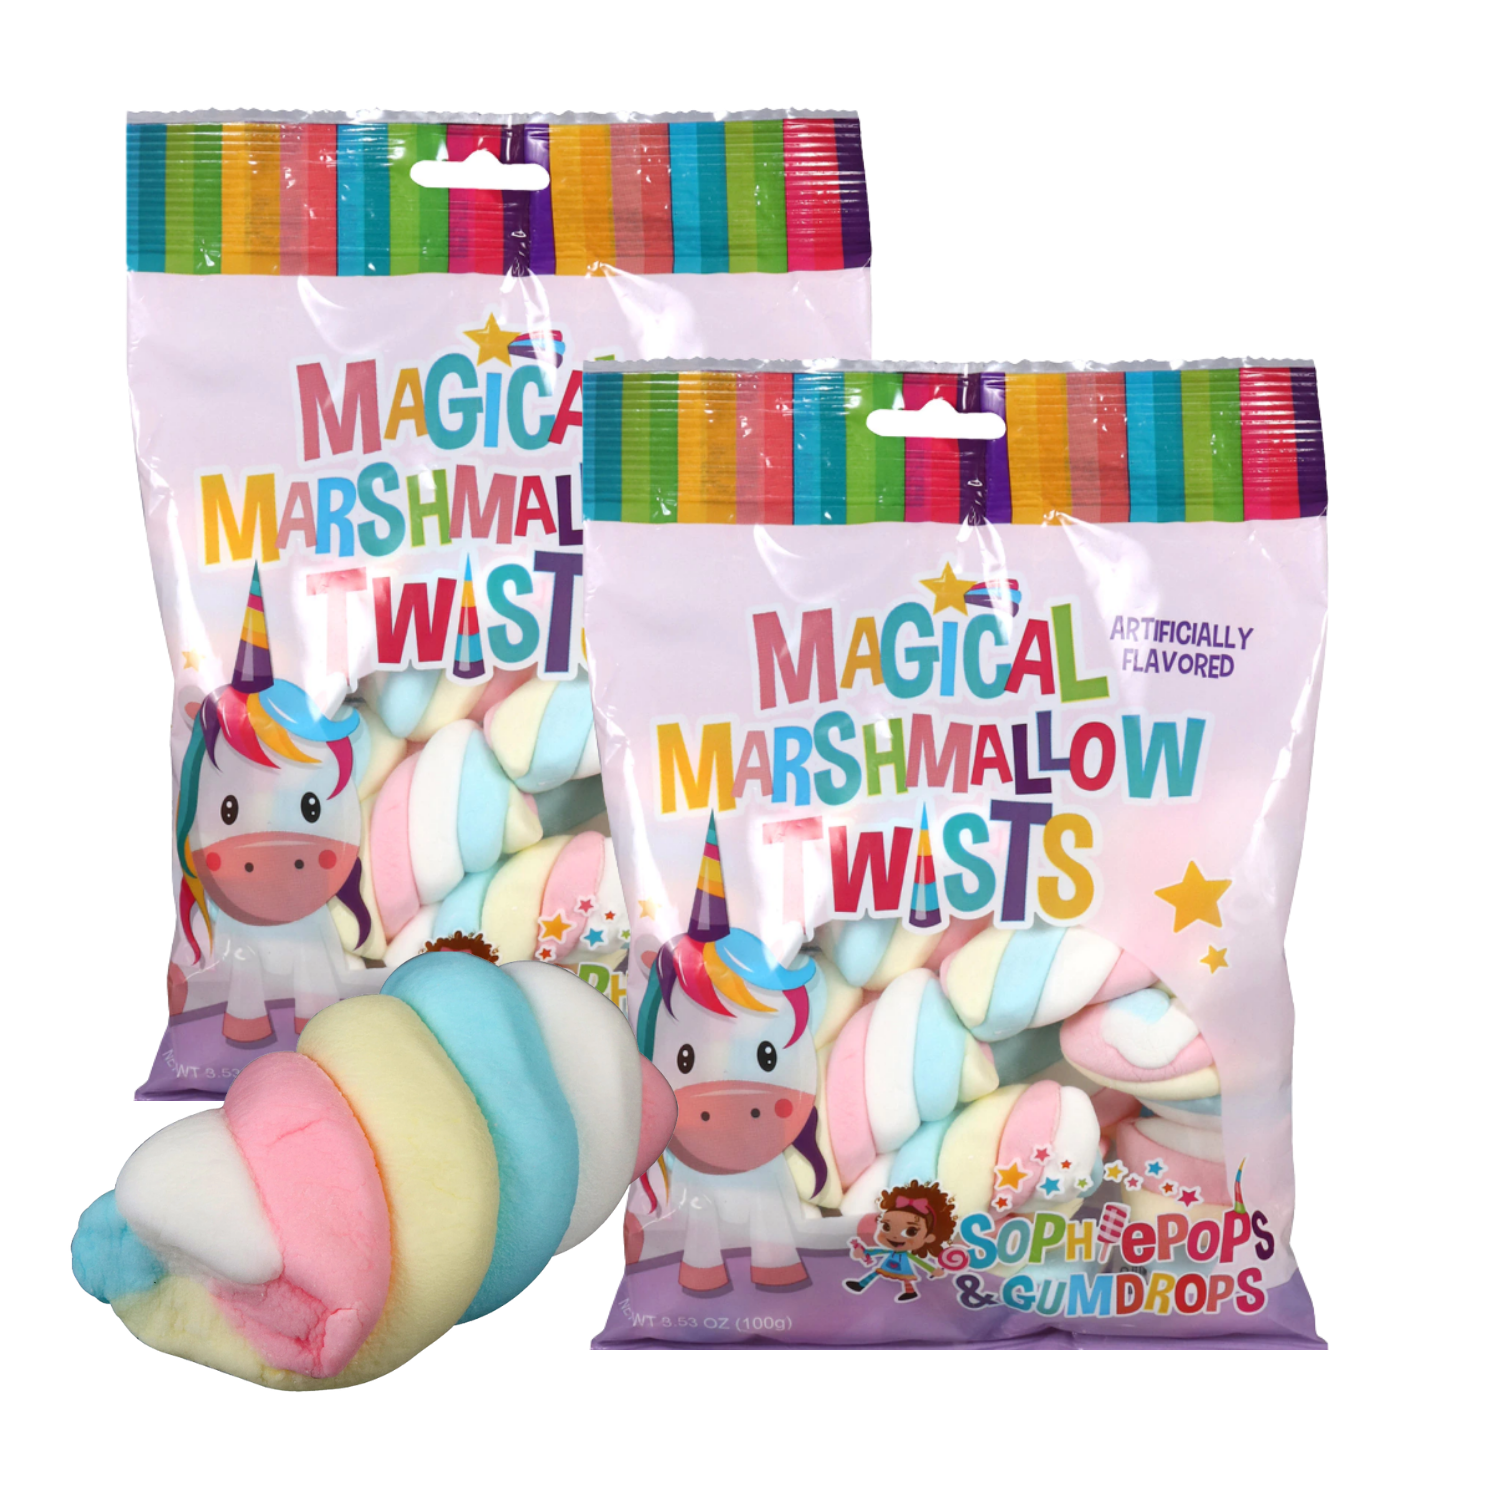 Marshmallow Twists Candy 3.53-oz. Bag with Swirled Rainbow Colors Great for Snacking Kid's Lunchbox Movie Nights Halloween Trick or Treats, Goody Fillers & Birthday Party Favor 2 Packs - image 1 of 6